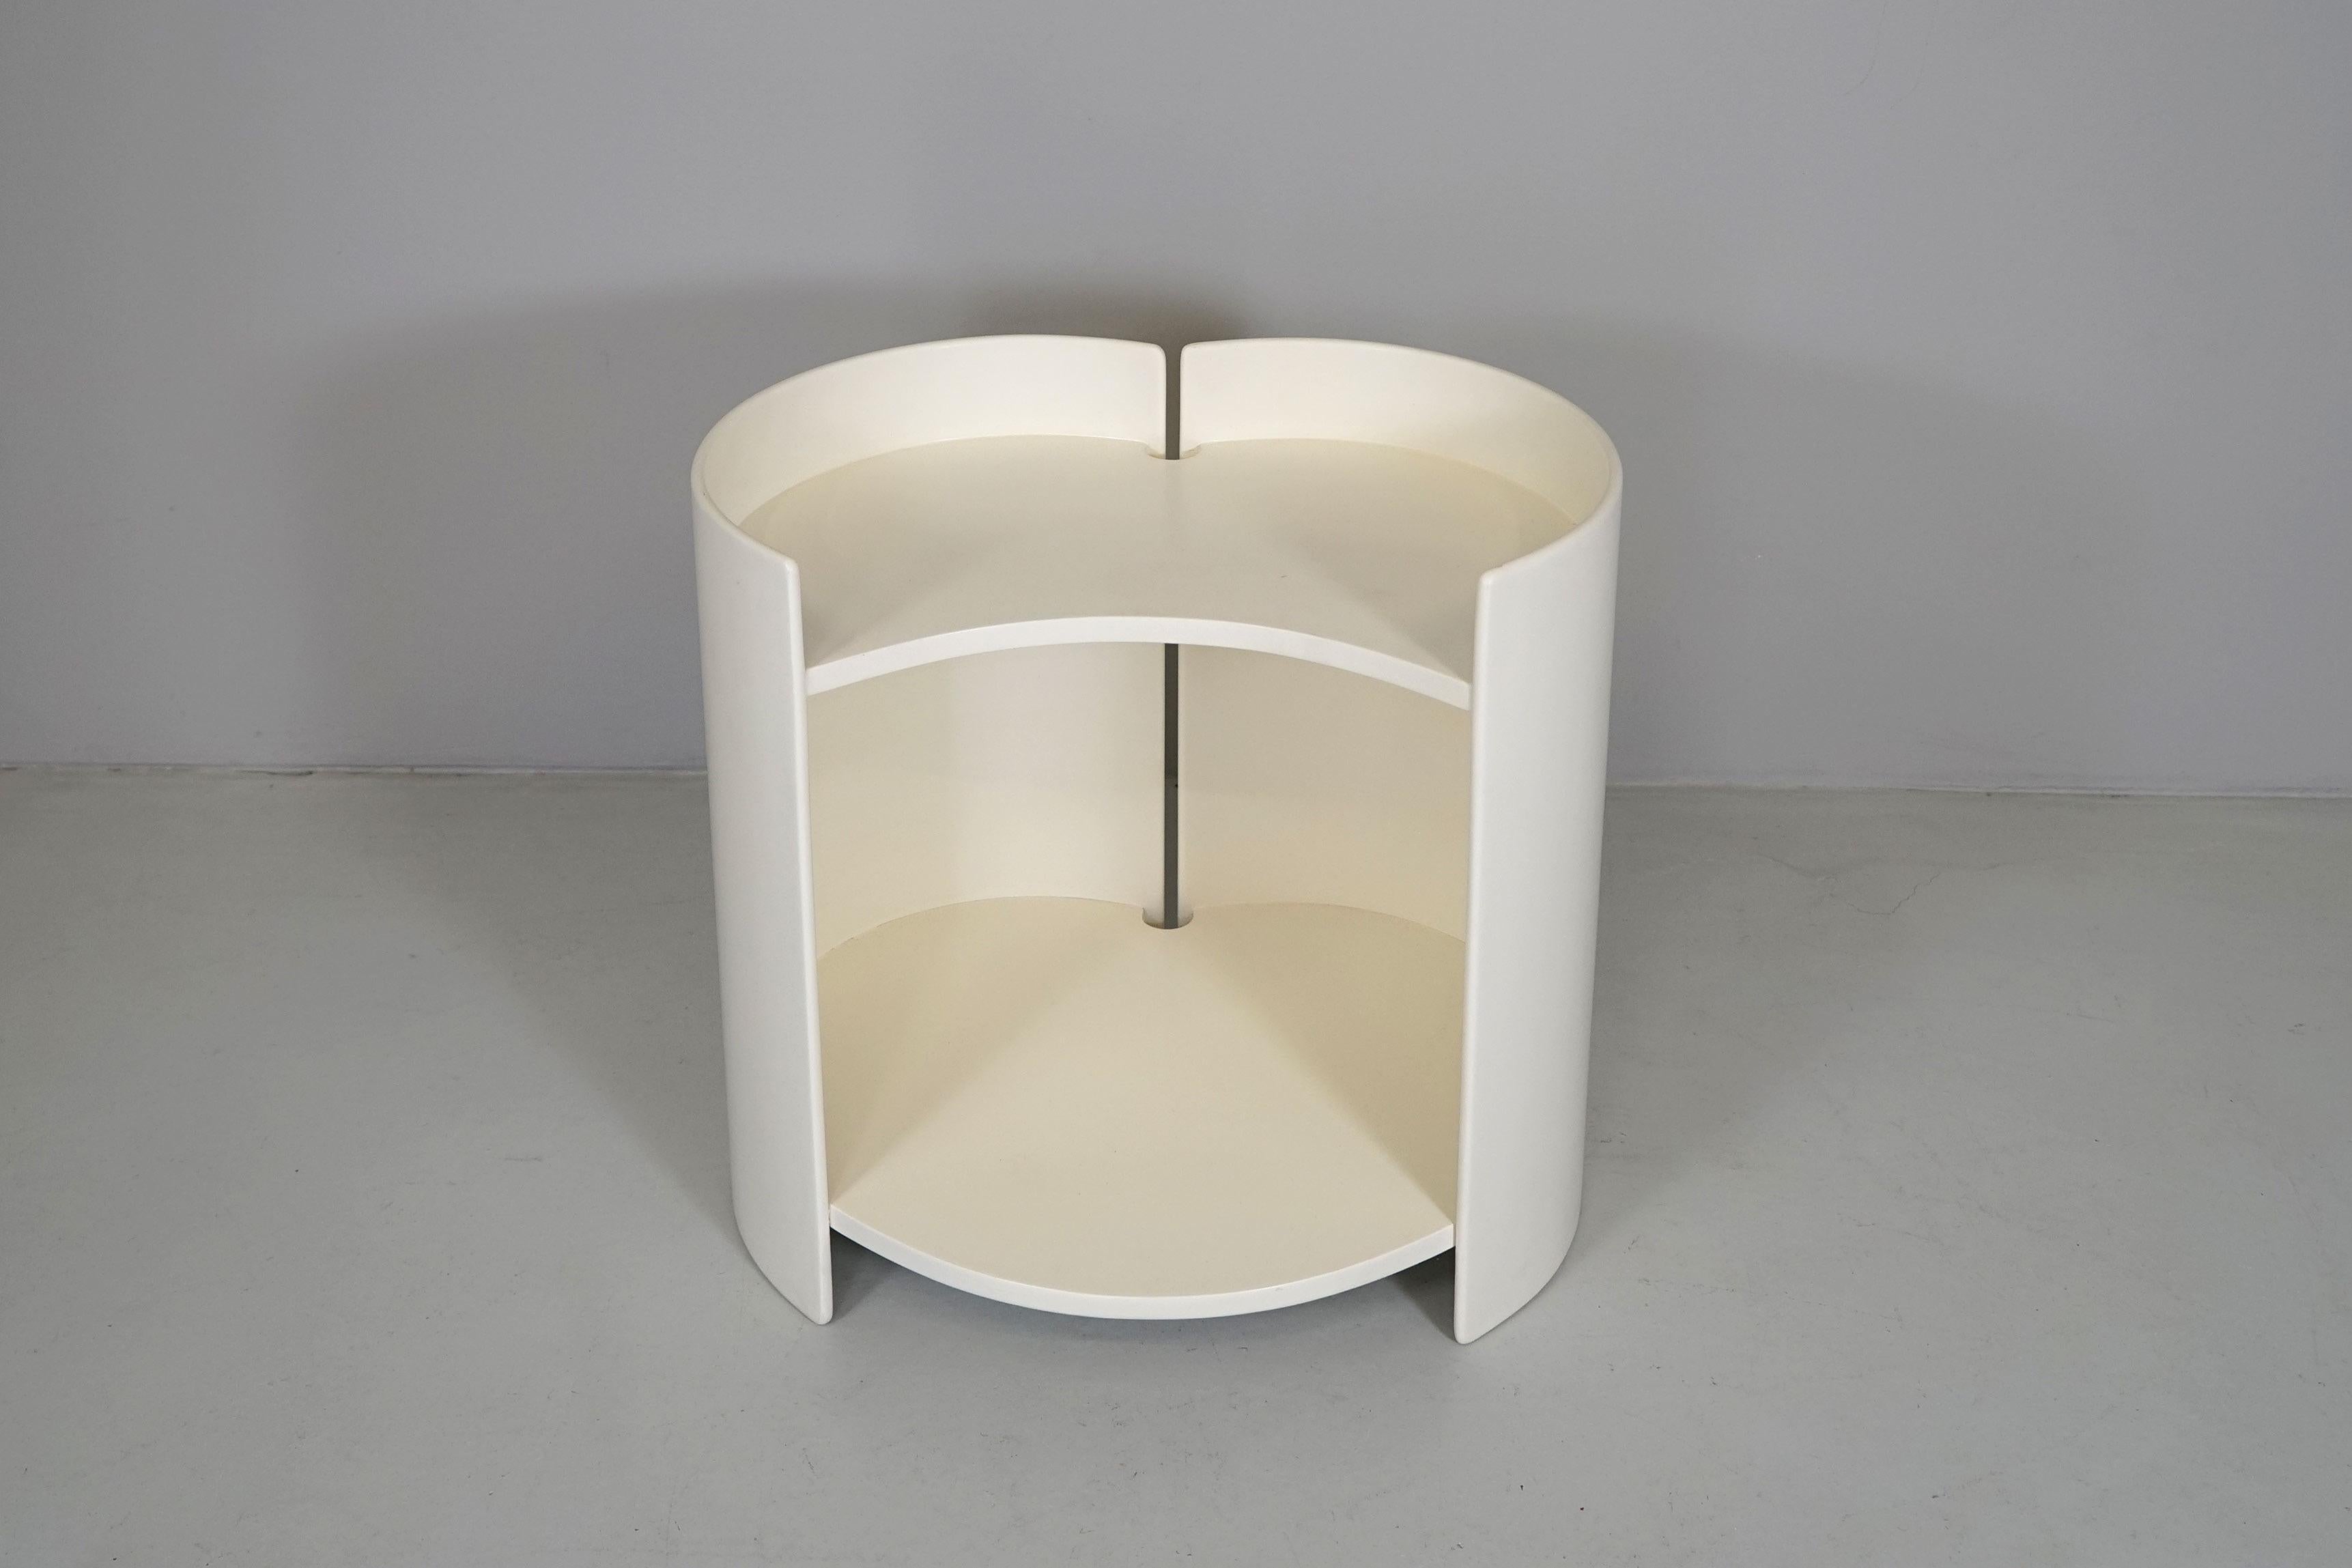 Side table model 'GEA' 
laminated wood, white lacquered 
Dimension / L. 54 cm W. 42 cm H. 52cm
Design / Kazuhide Takahama 1961
Manufacturer Gavina Italy.

Takahama is best known as a furniture and lighting designer, and has produced work for Knoll,